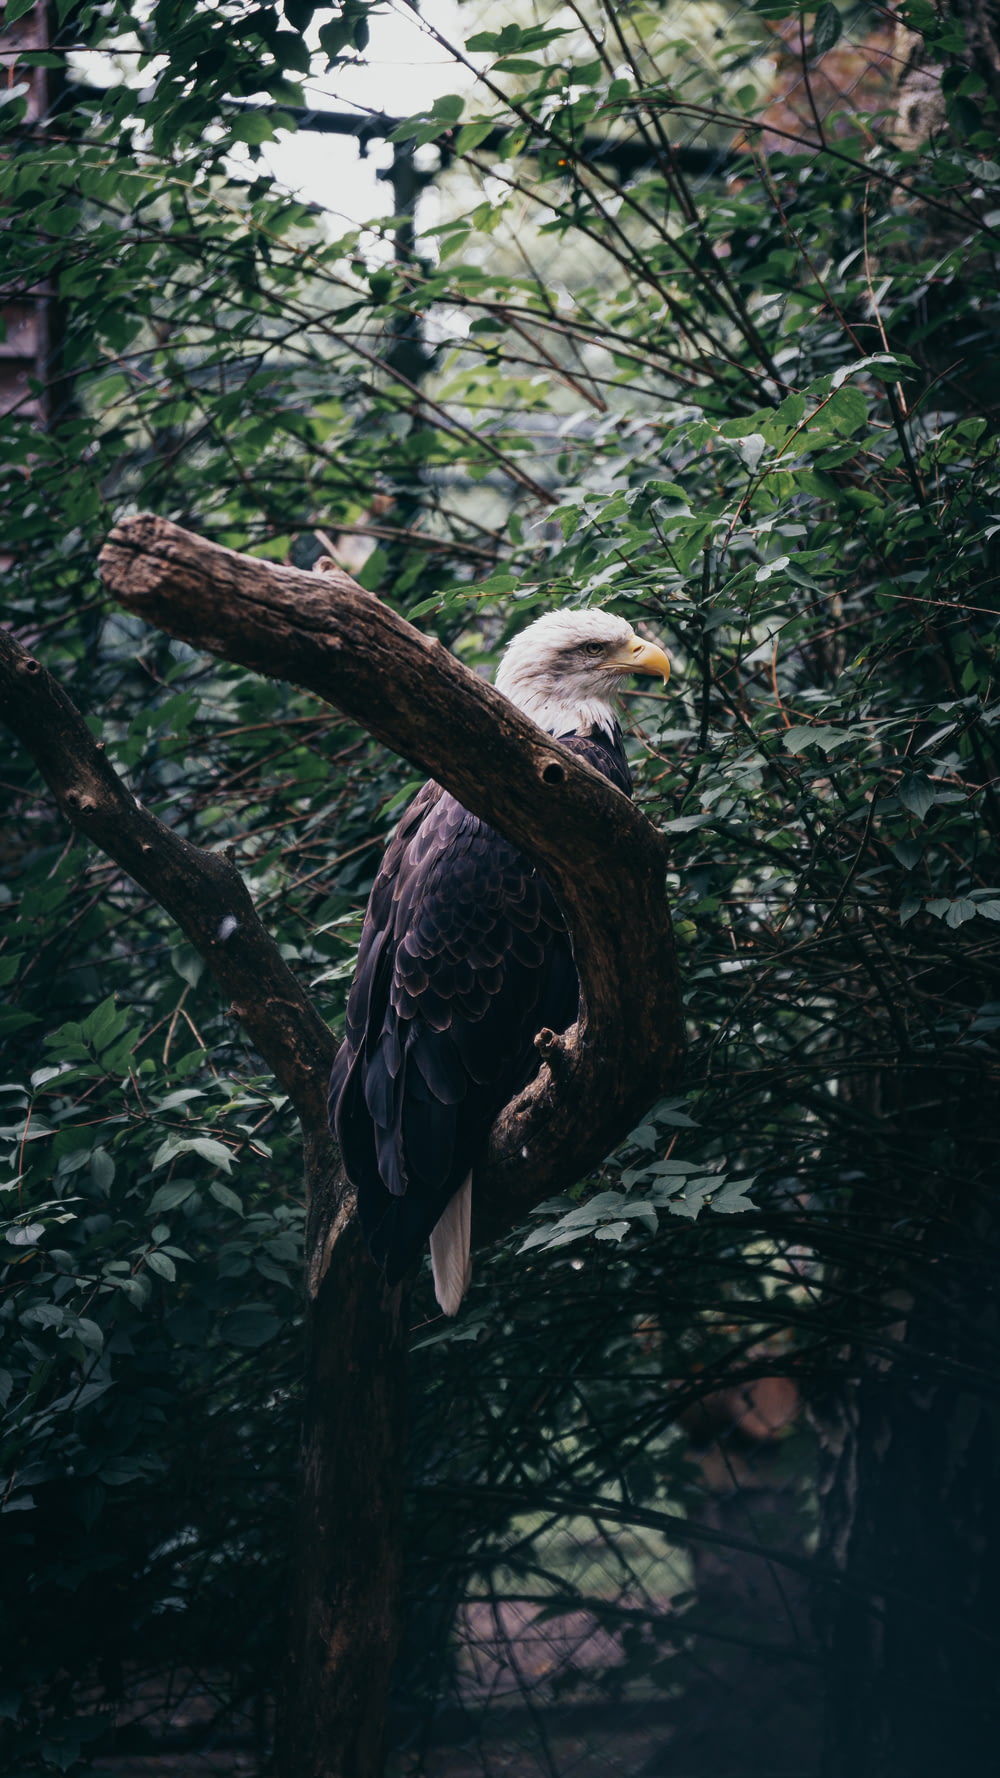 a bald eagle perched on a tree branch